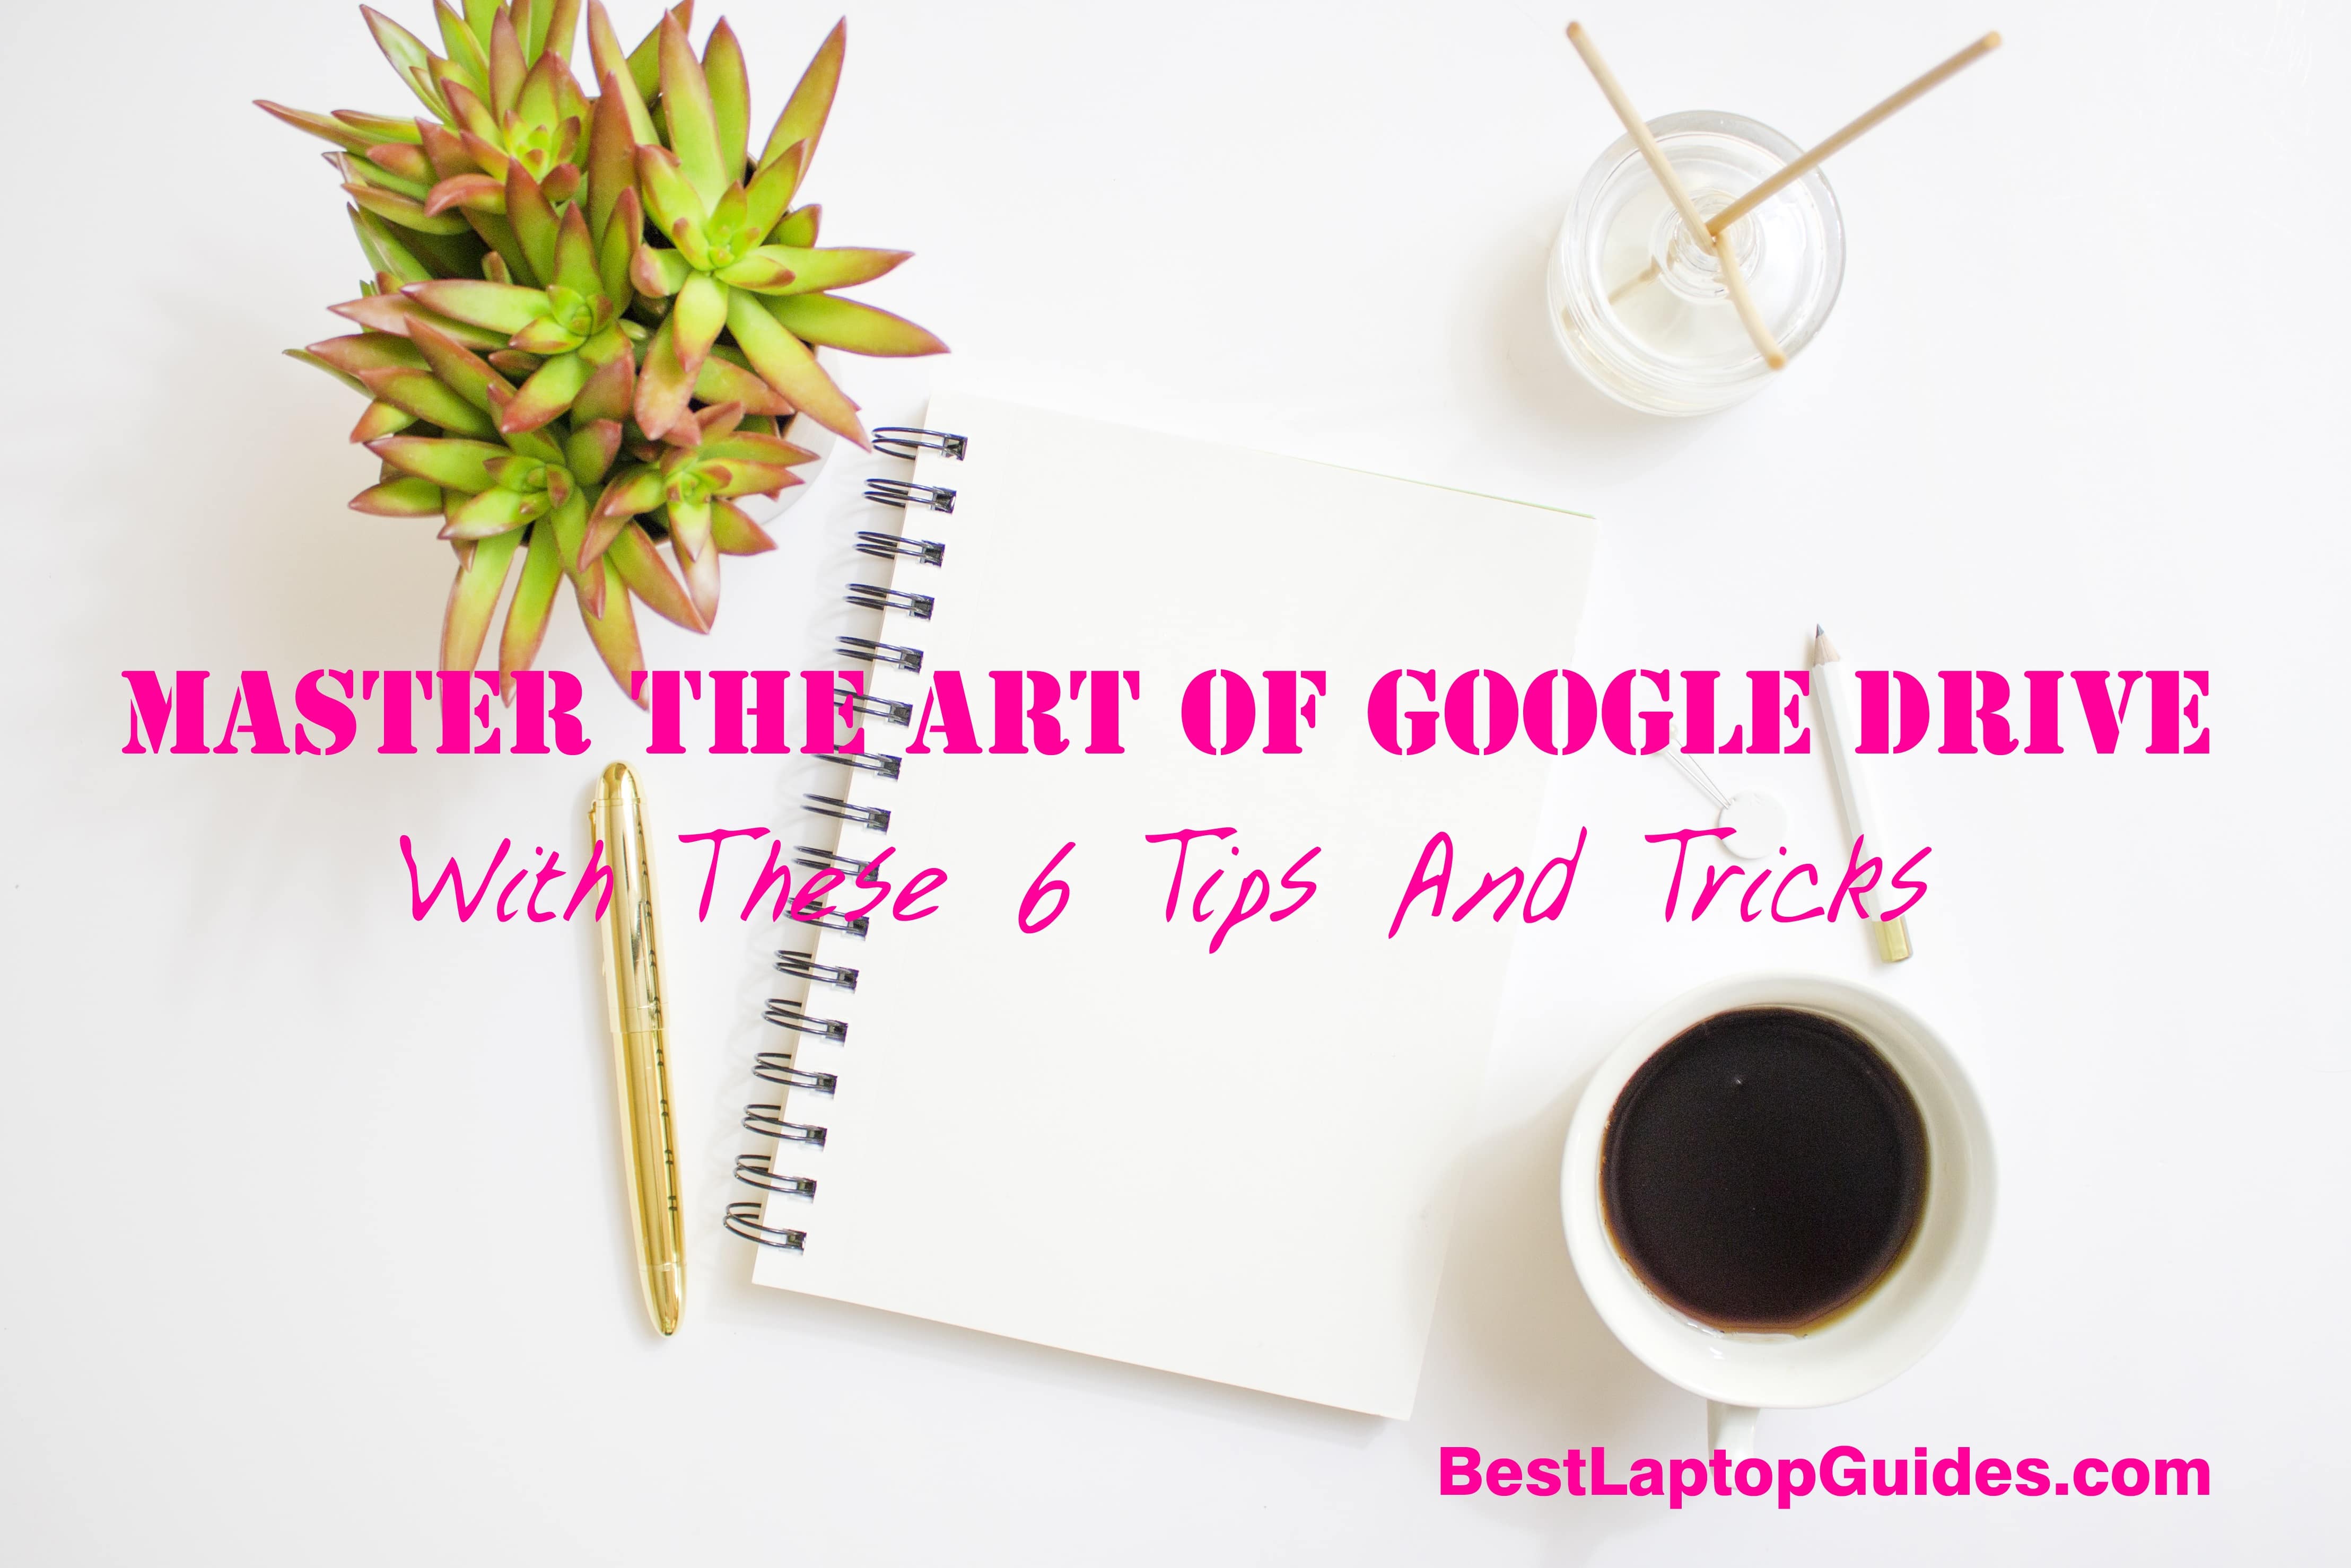 Master The Art Of Google Drive With These 6 Tips And Tricks